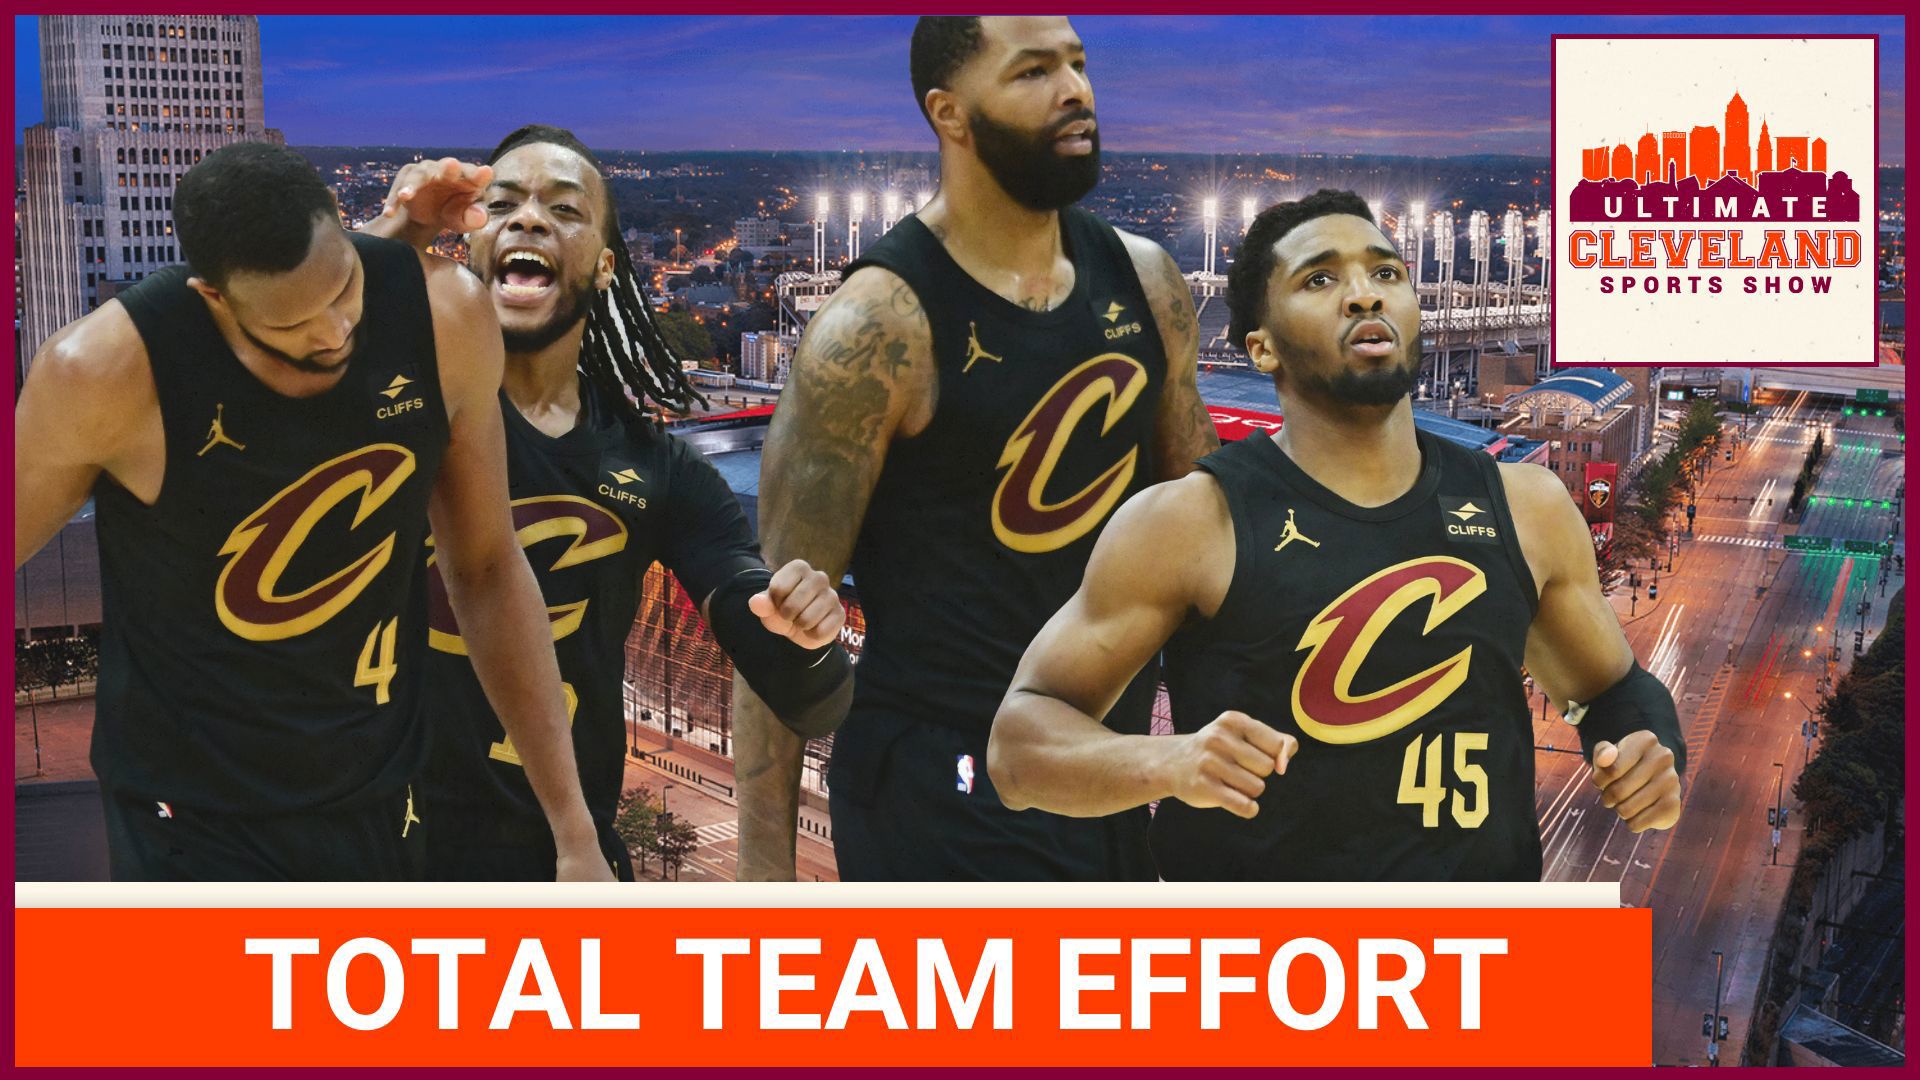 Unyielding, relentless, and determined: That is how the Cleveland Cavaliers seized Game 5 over the Orlando Magic 104-103, now leading the series 3-2. With Game 6 on